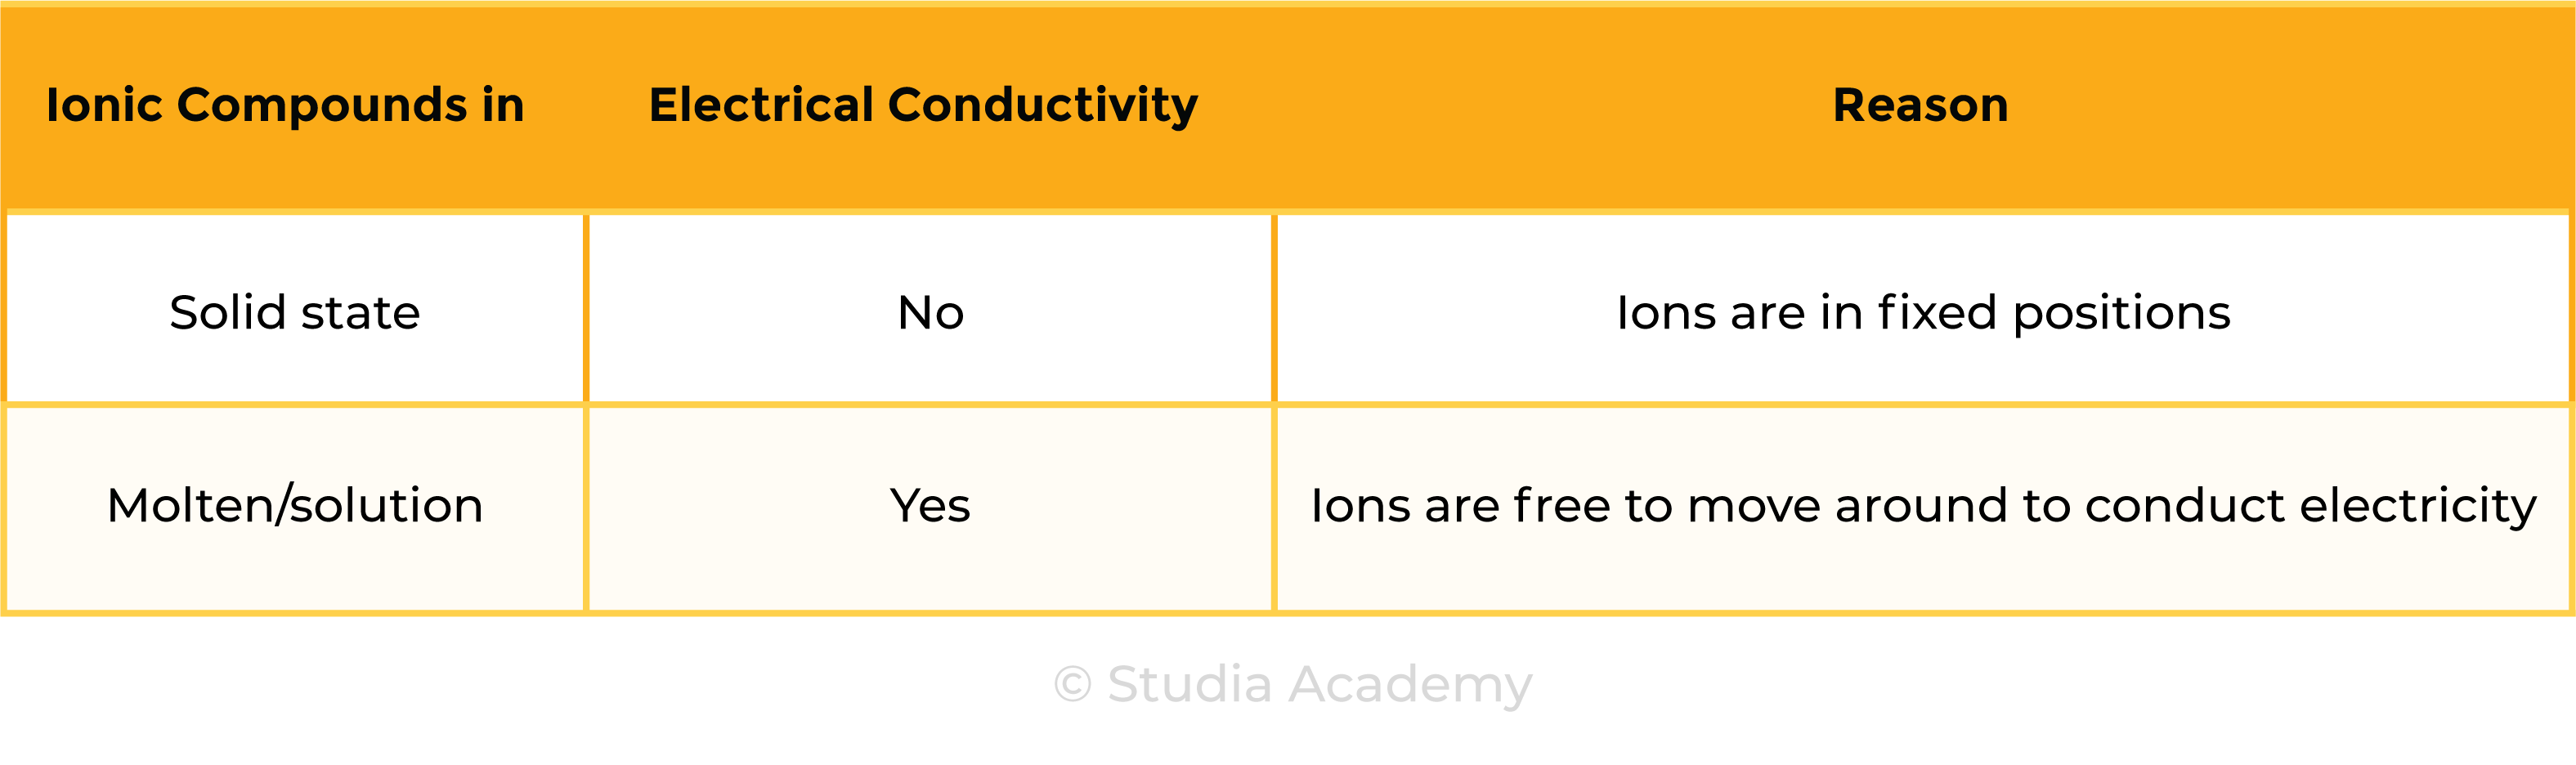 edexcel_igcse_chemistry_topic 06 tables_ionic bonding_004_conductivity of ionic compounds in solid vs molten or aqueous state